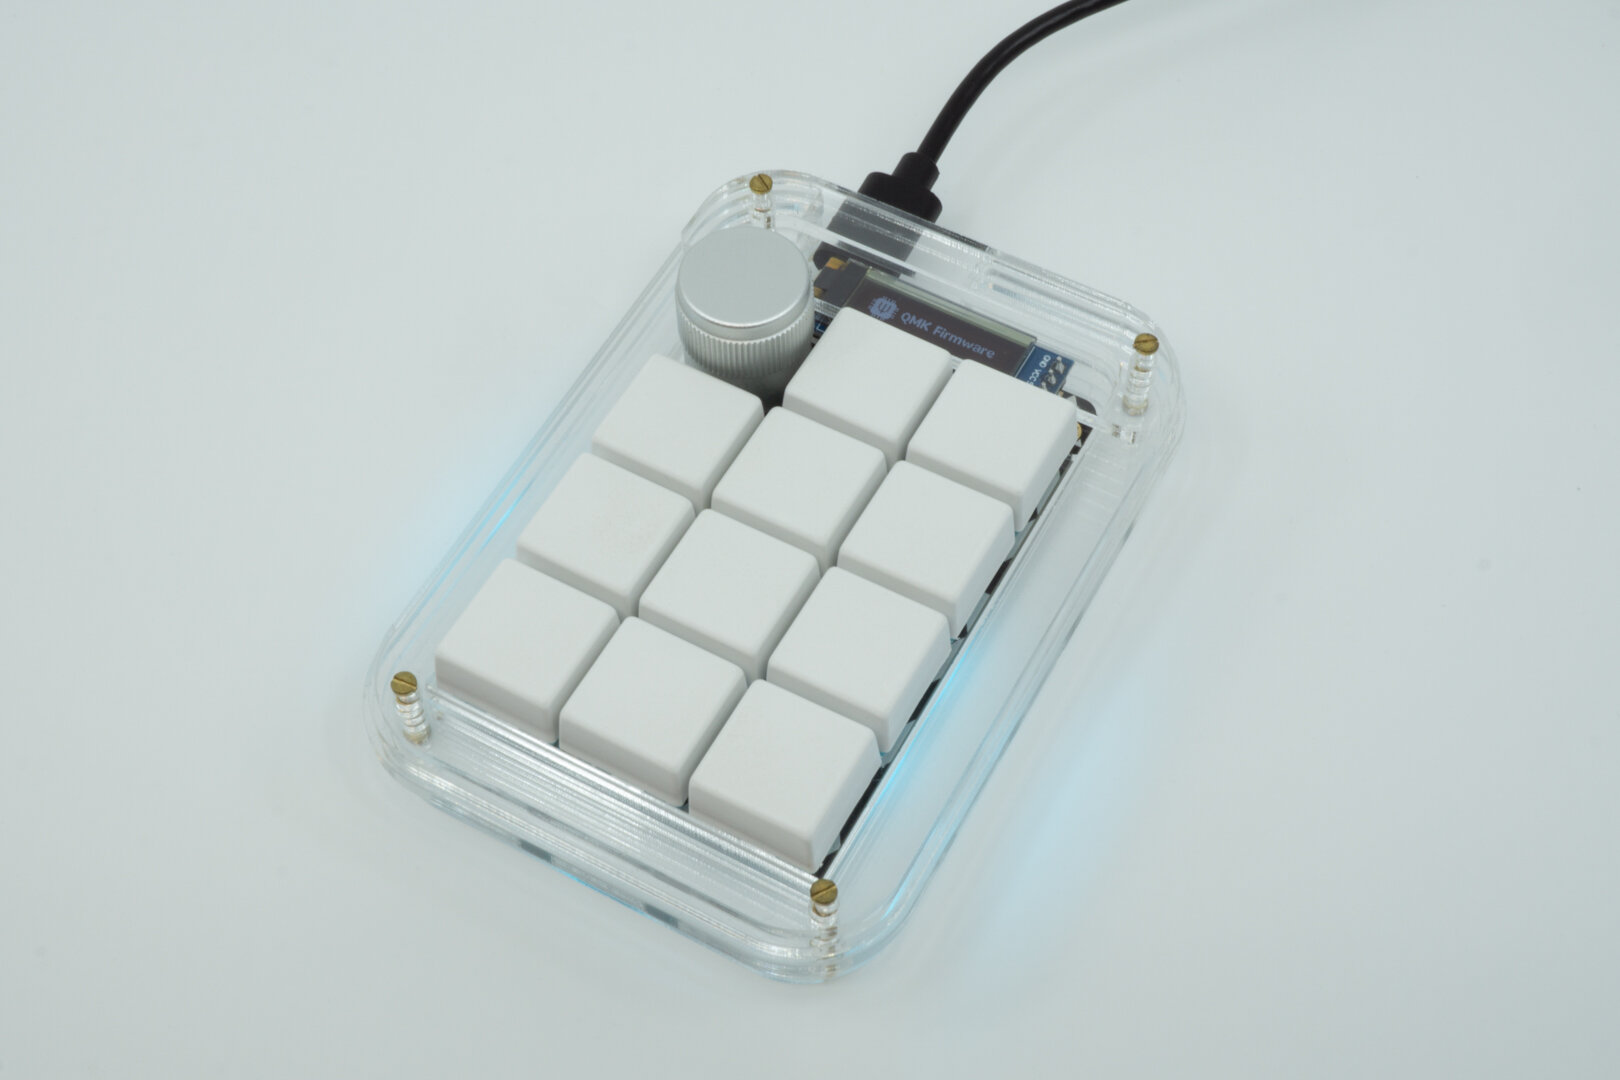 A Zima with a clear high profile case. The encoder is optional: you can use it with twelve keys instead, too.